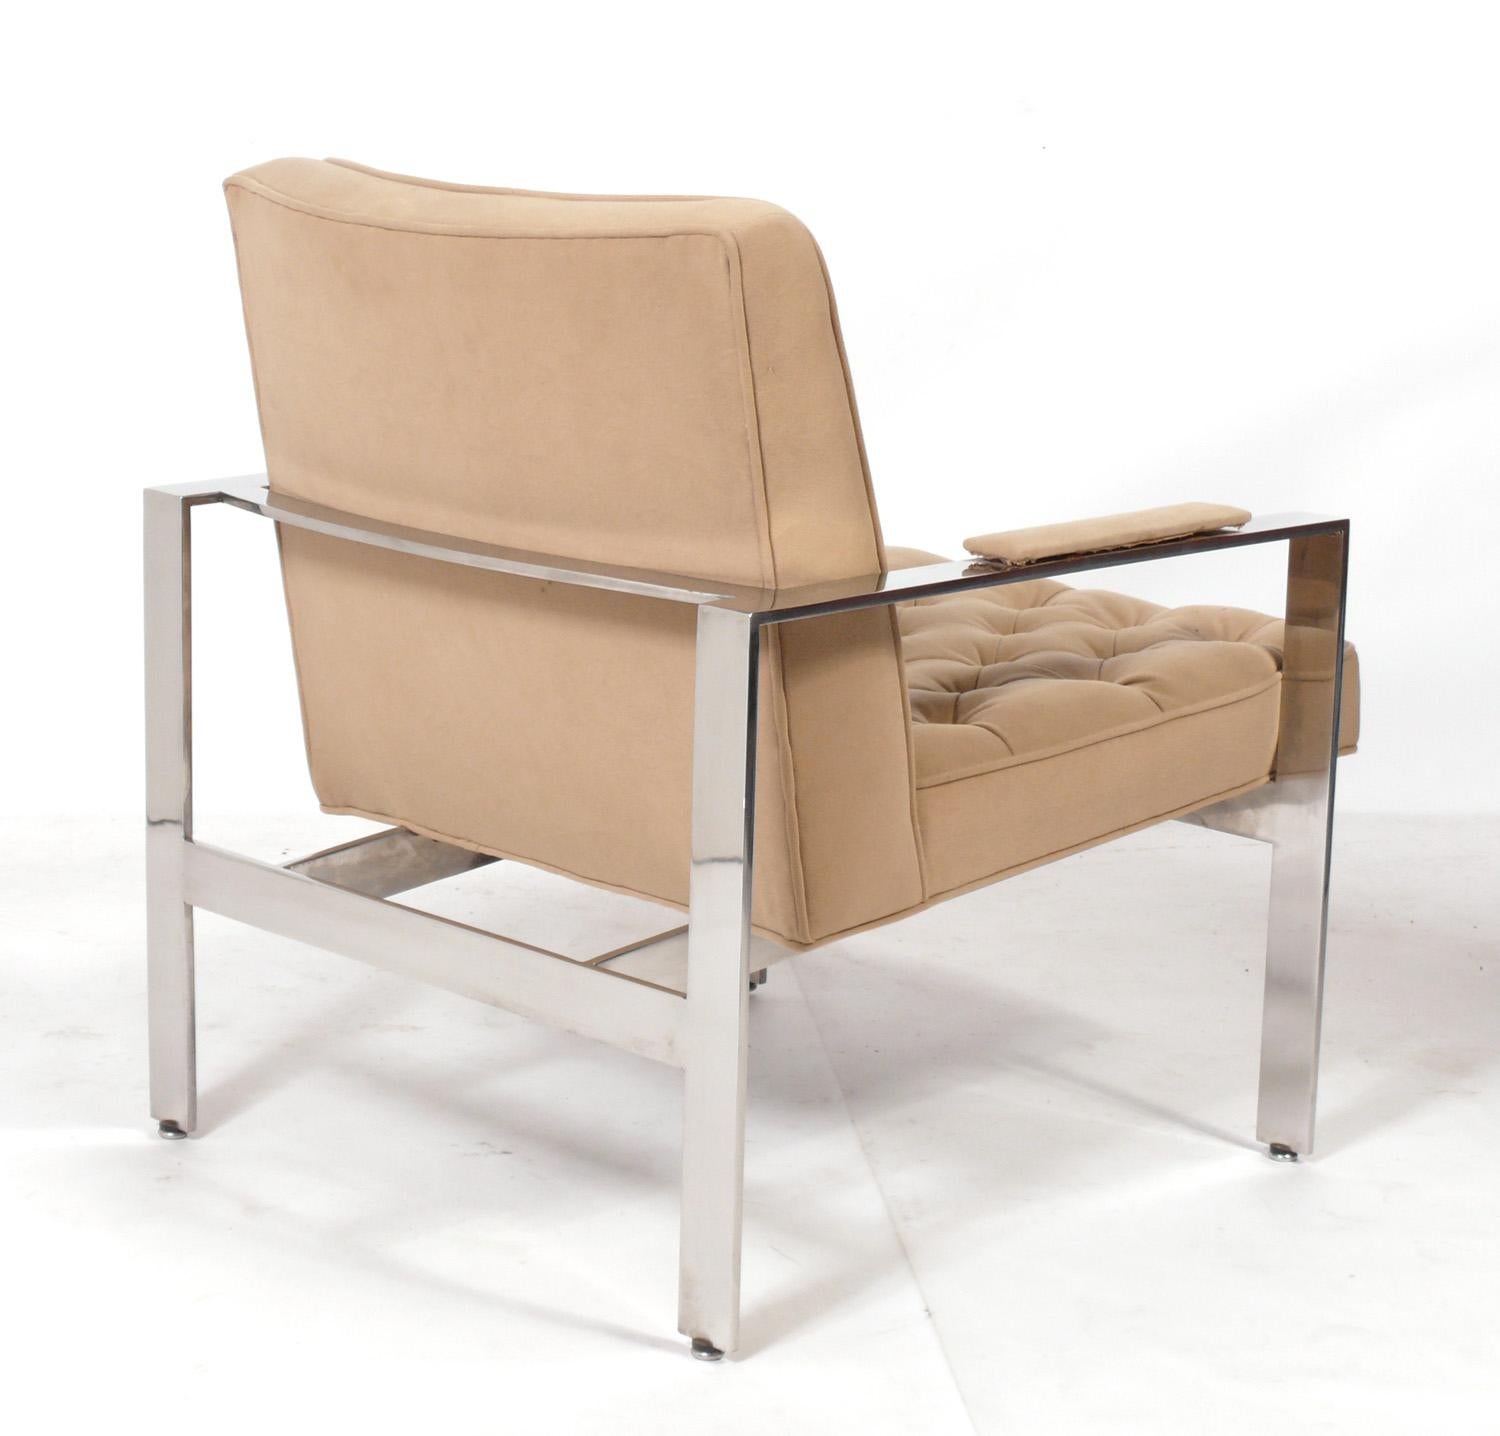 Clean Lined Tufted Chrome Lounge Chair, designed by Milo Baughman, American, circa 1960s. It is very heavy and well made. This chair is currently being reupholstered and can be completed in your fabric. SImply send us 4 yards of your fabric after